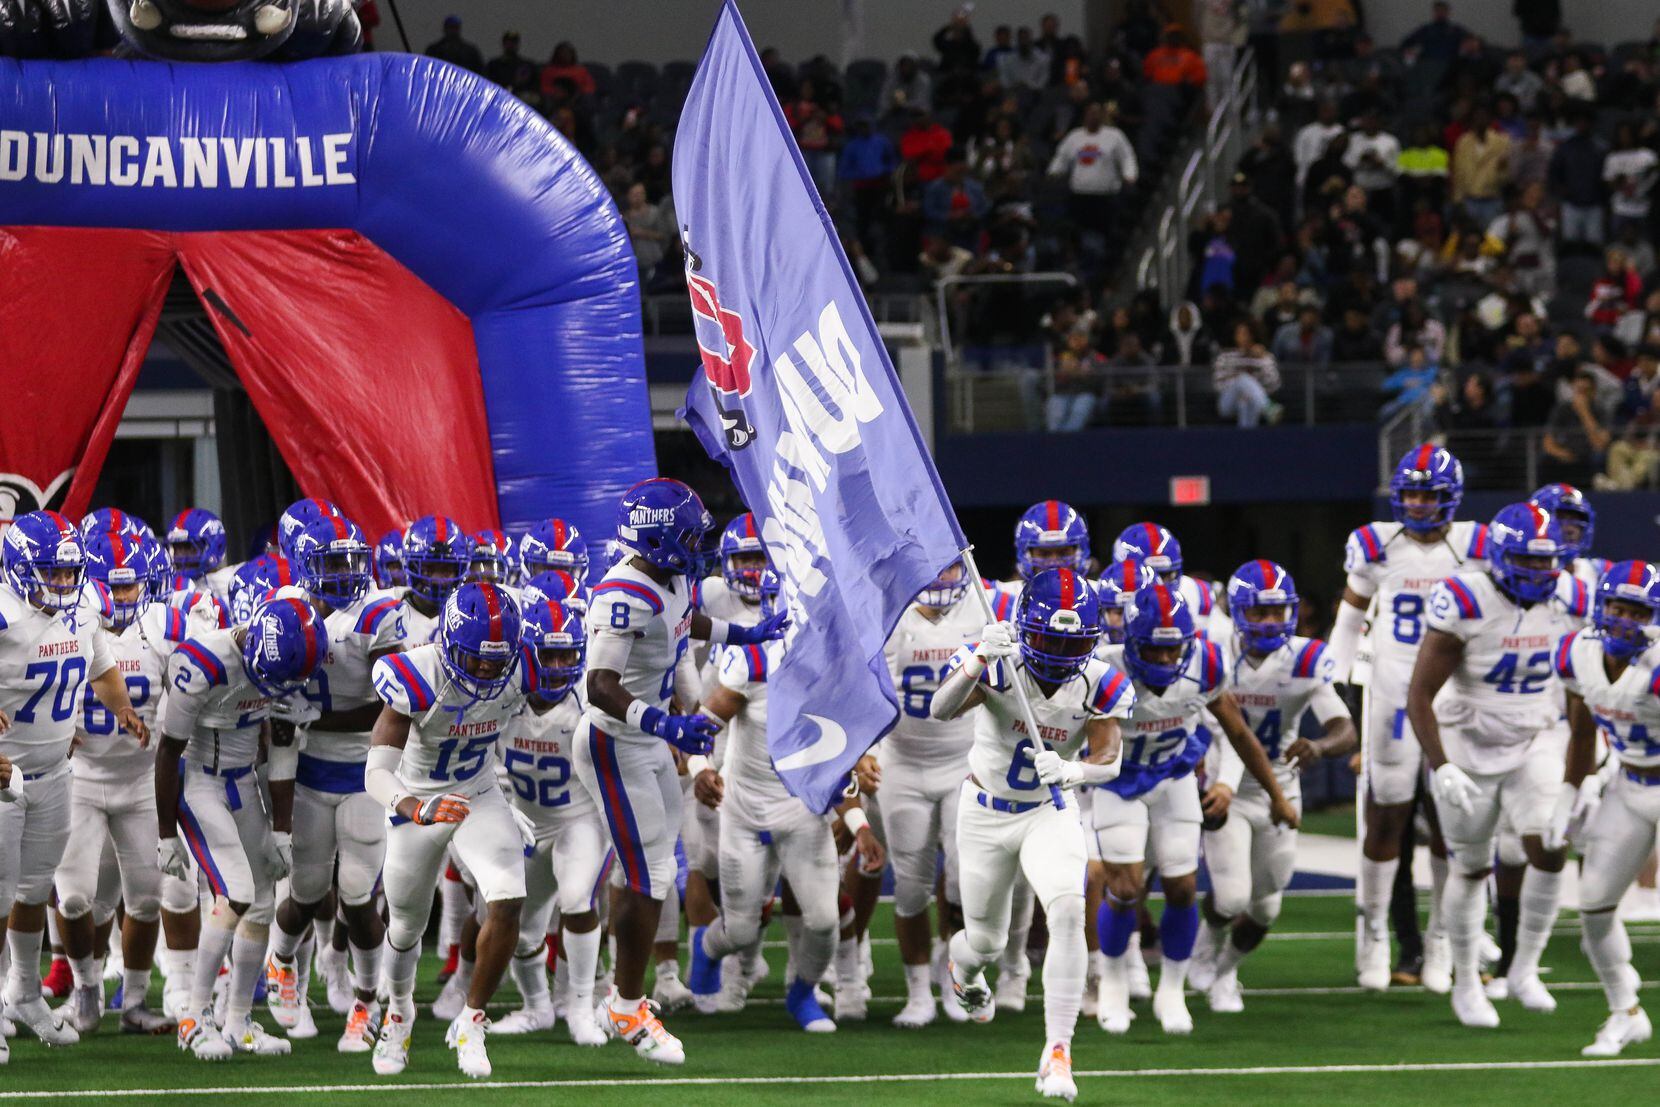 Duncanville players run out before a Class 6A Division I state championship game against...